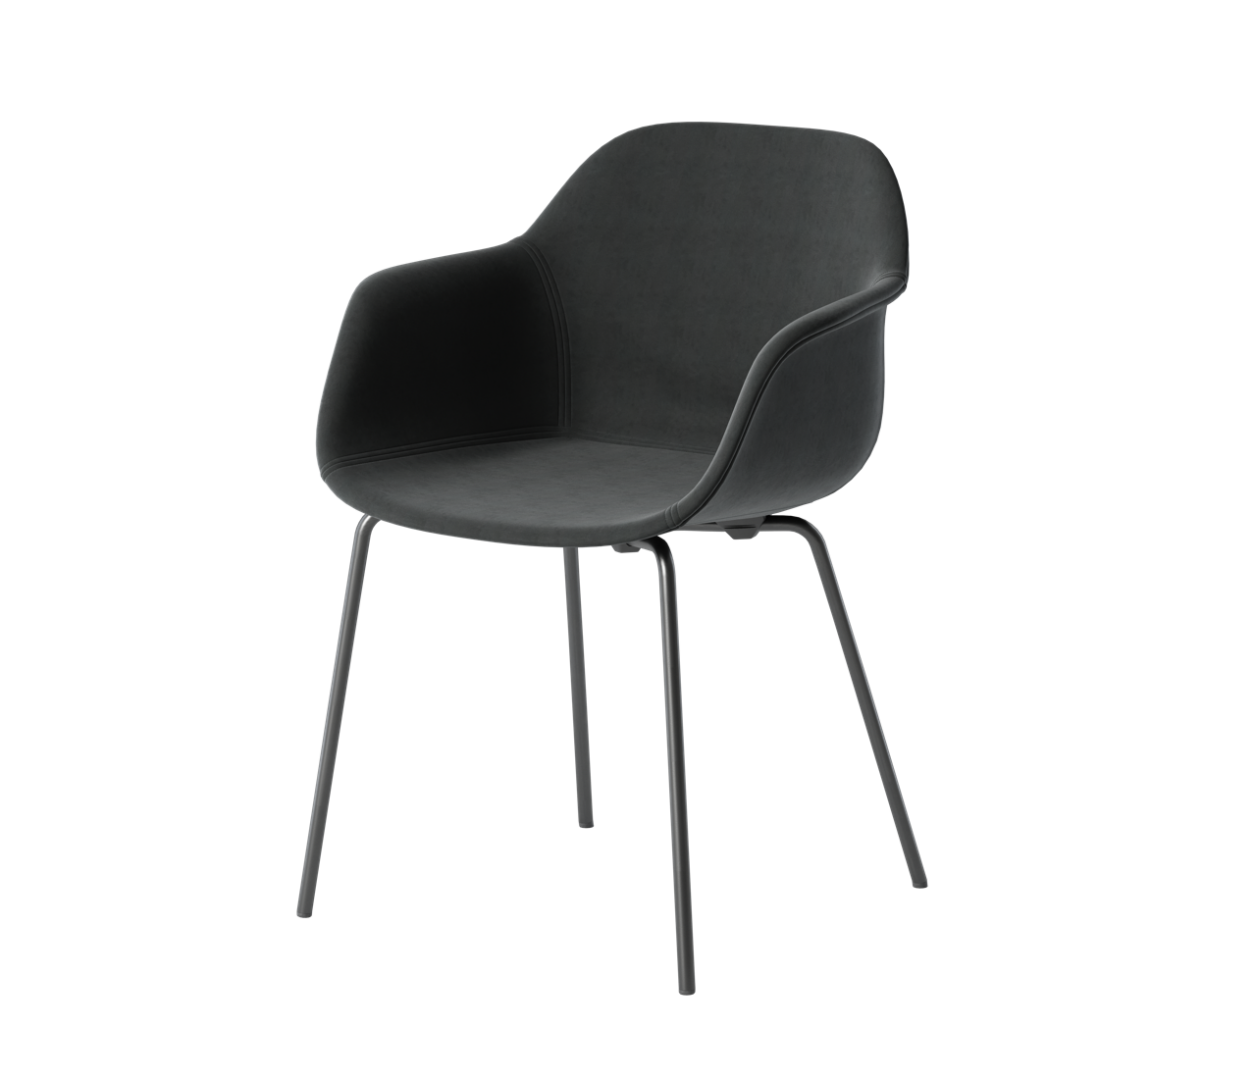 OCEE&FOUR – Chairs – FourMe 44 – Plastic Shell - Fully Upholstered - Packshot Image 1 Large